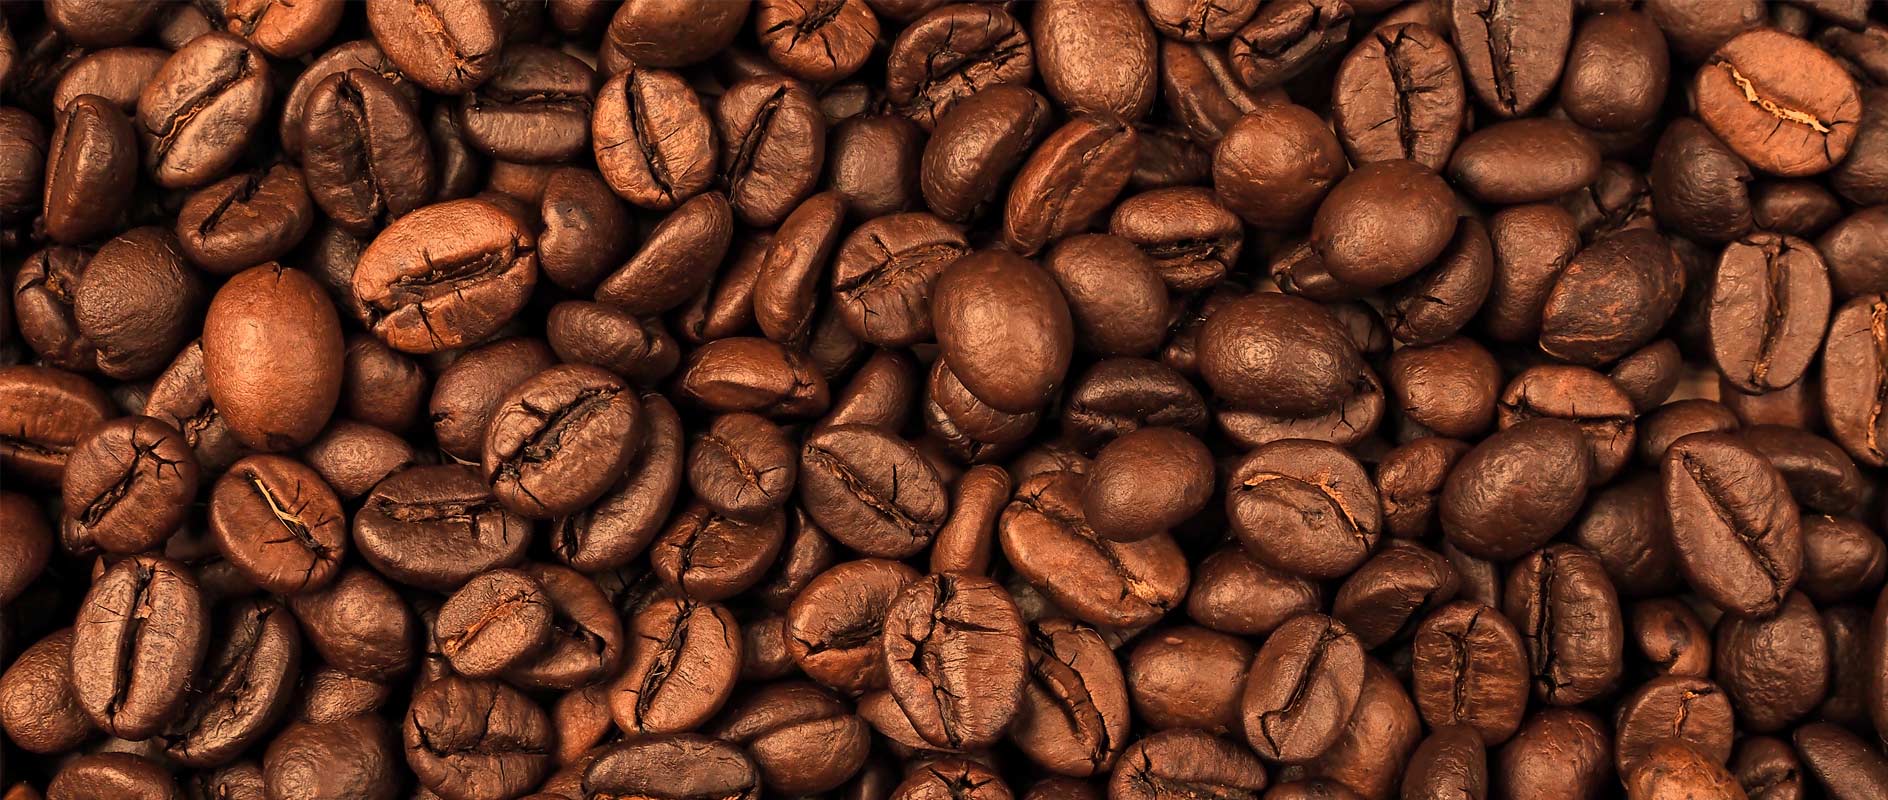 how to import coffee from colombia